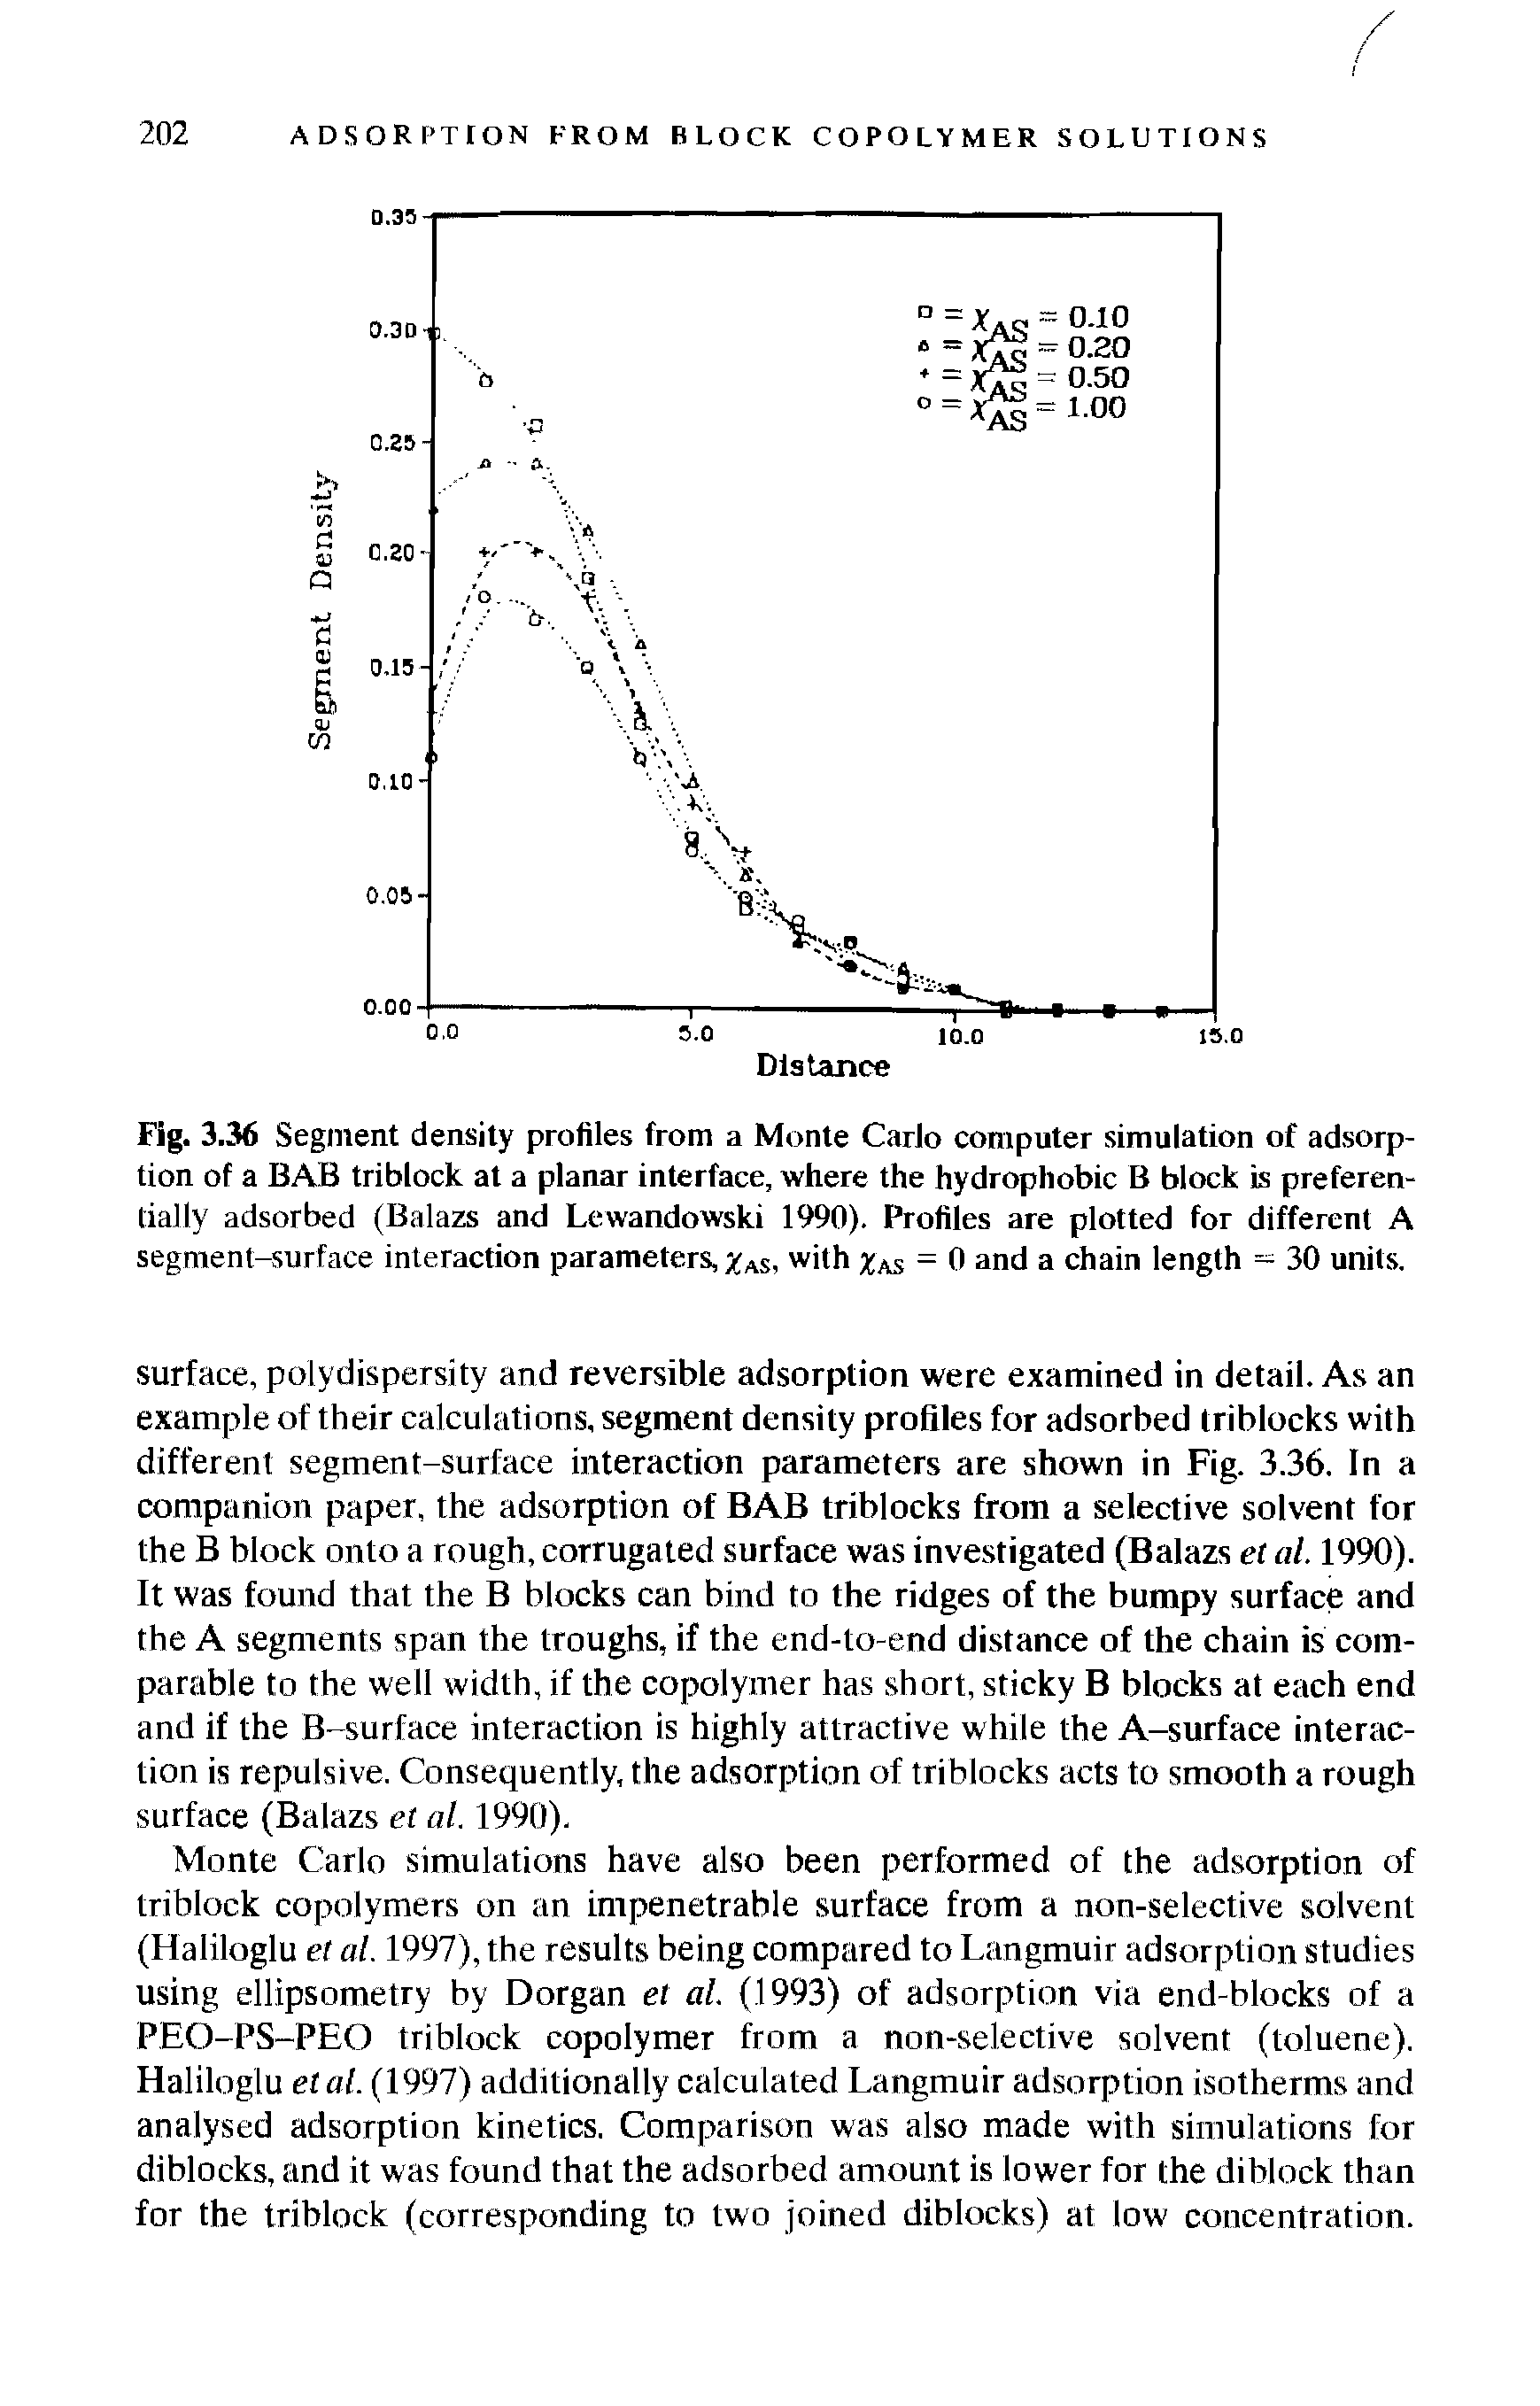 Fig. 3.36 Segment density profiles from a Monte Carlo computer simulation of adsorption of a BAB triblock at a planar interface, where the hydrophobic B block is preferentially adsorbed (Balazs and Lewandowski 1990). Profiles are plotted for different A segment-surface interaction parameters, AS, with Xas = 0 and a chain length - 30 units.